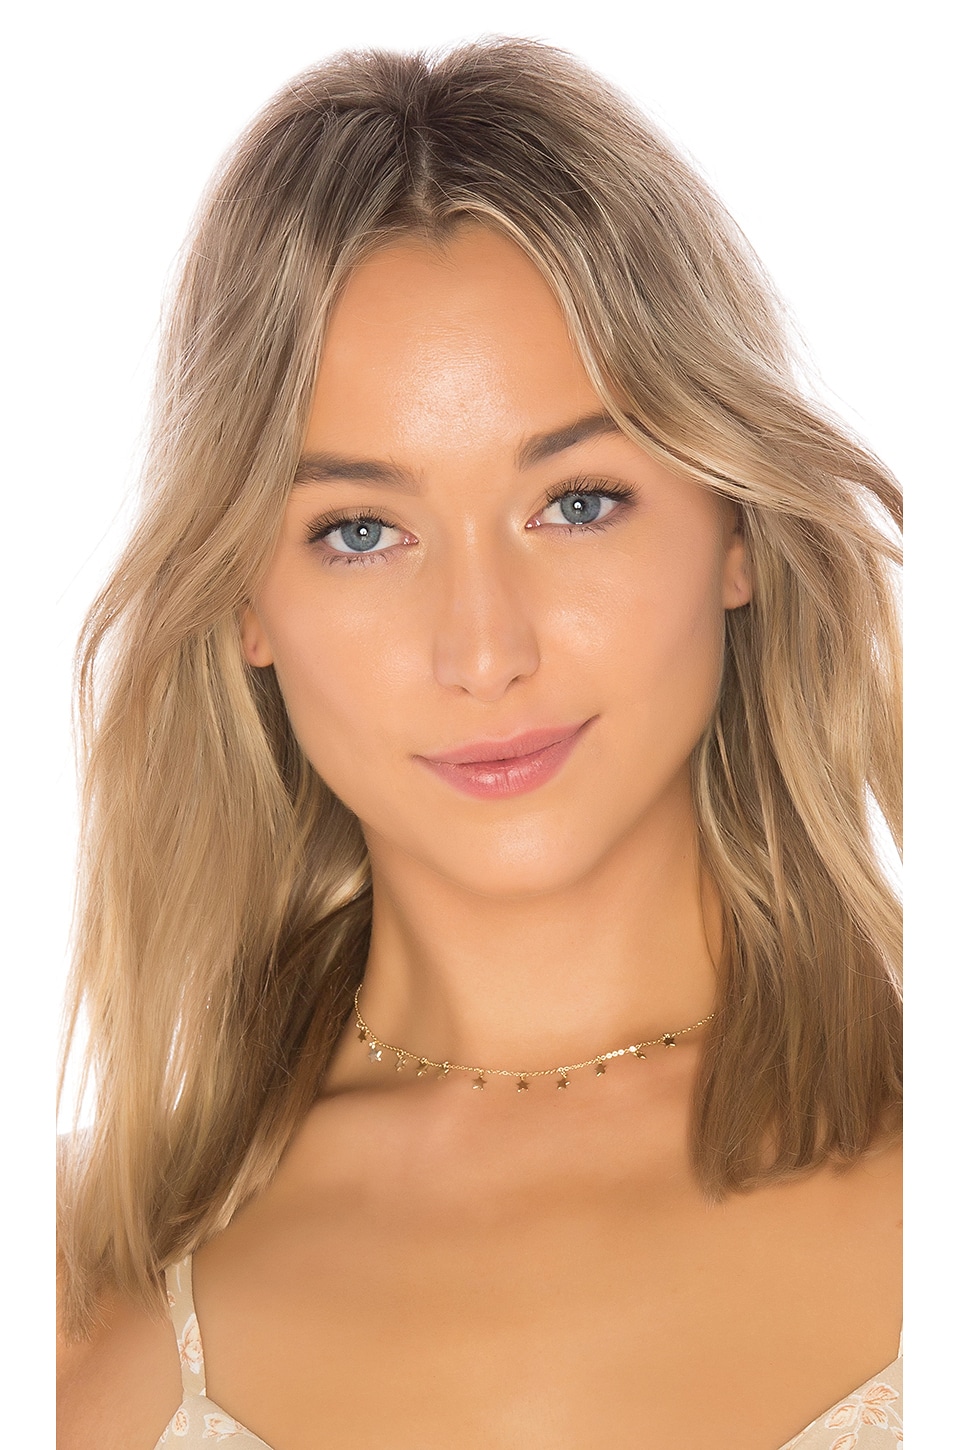 THE M JEWELERS NY THE M JEWELERS NY PACO STAR CHOKER IN METALLIC GOLD.,TSNR-WL29